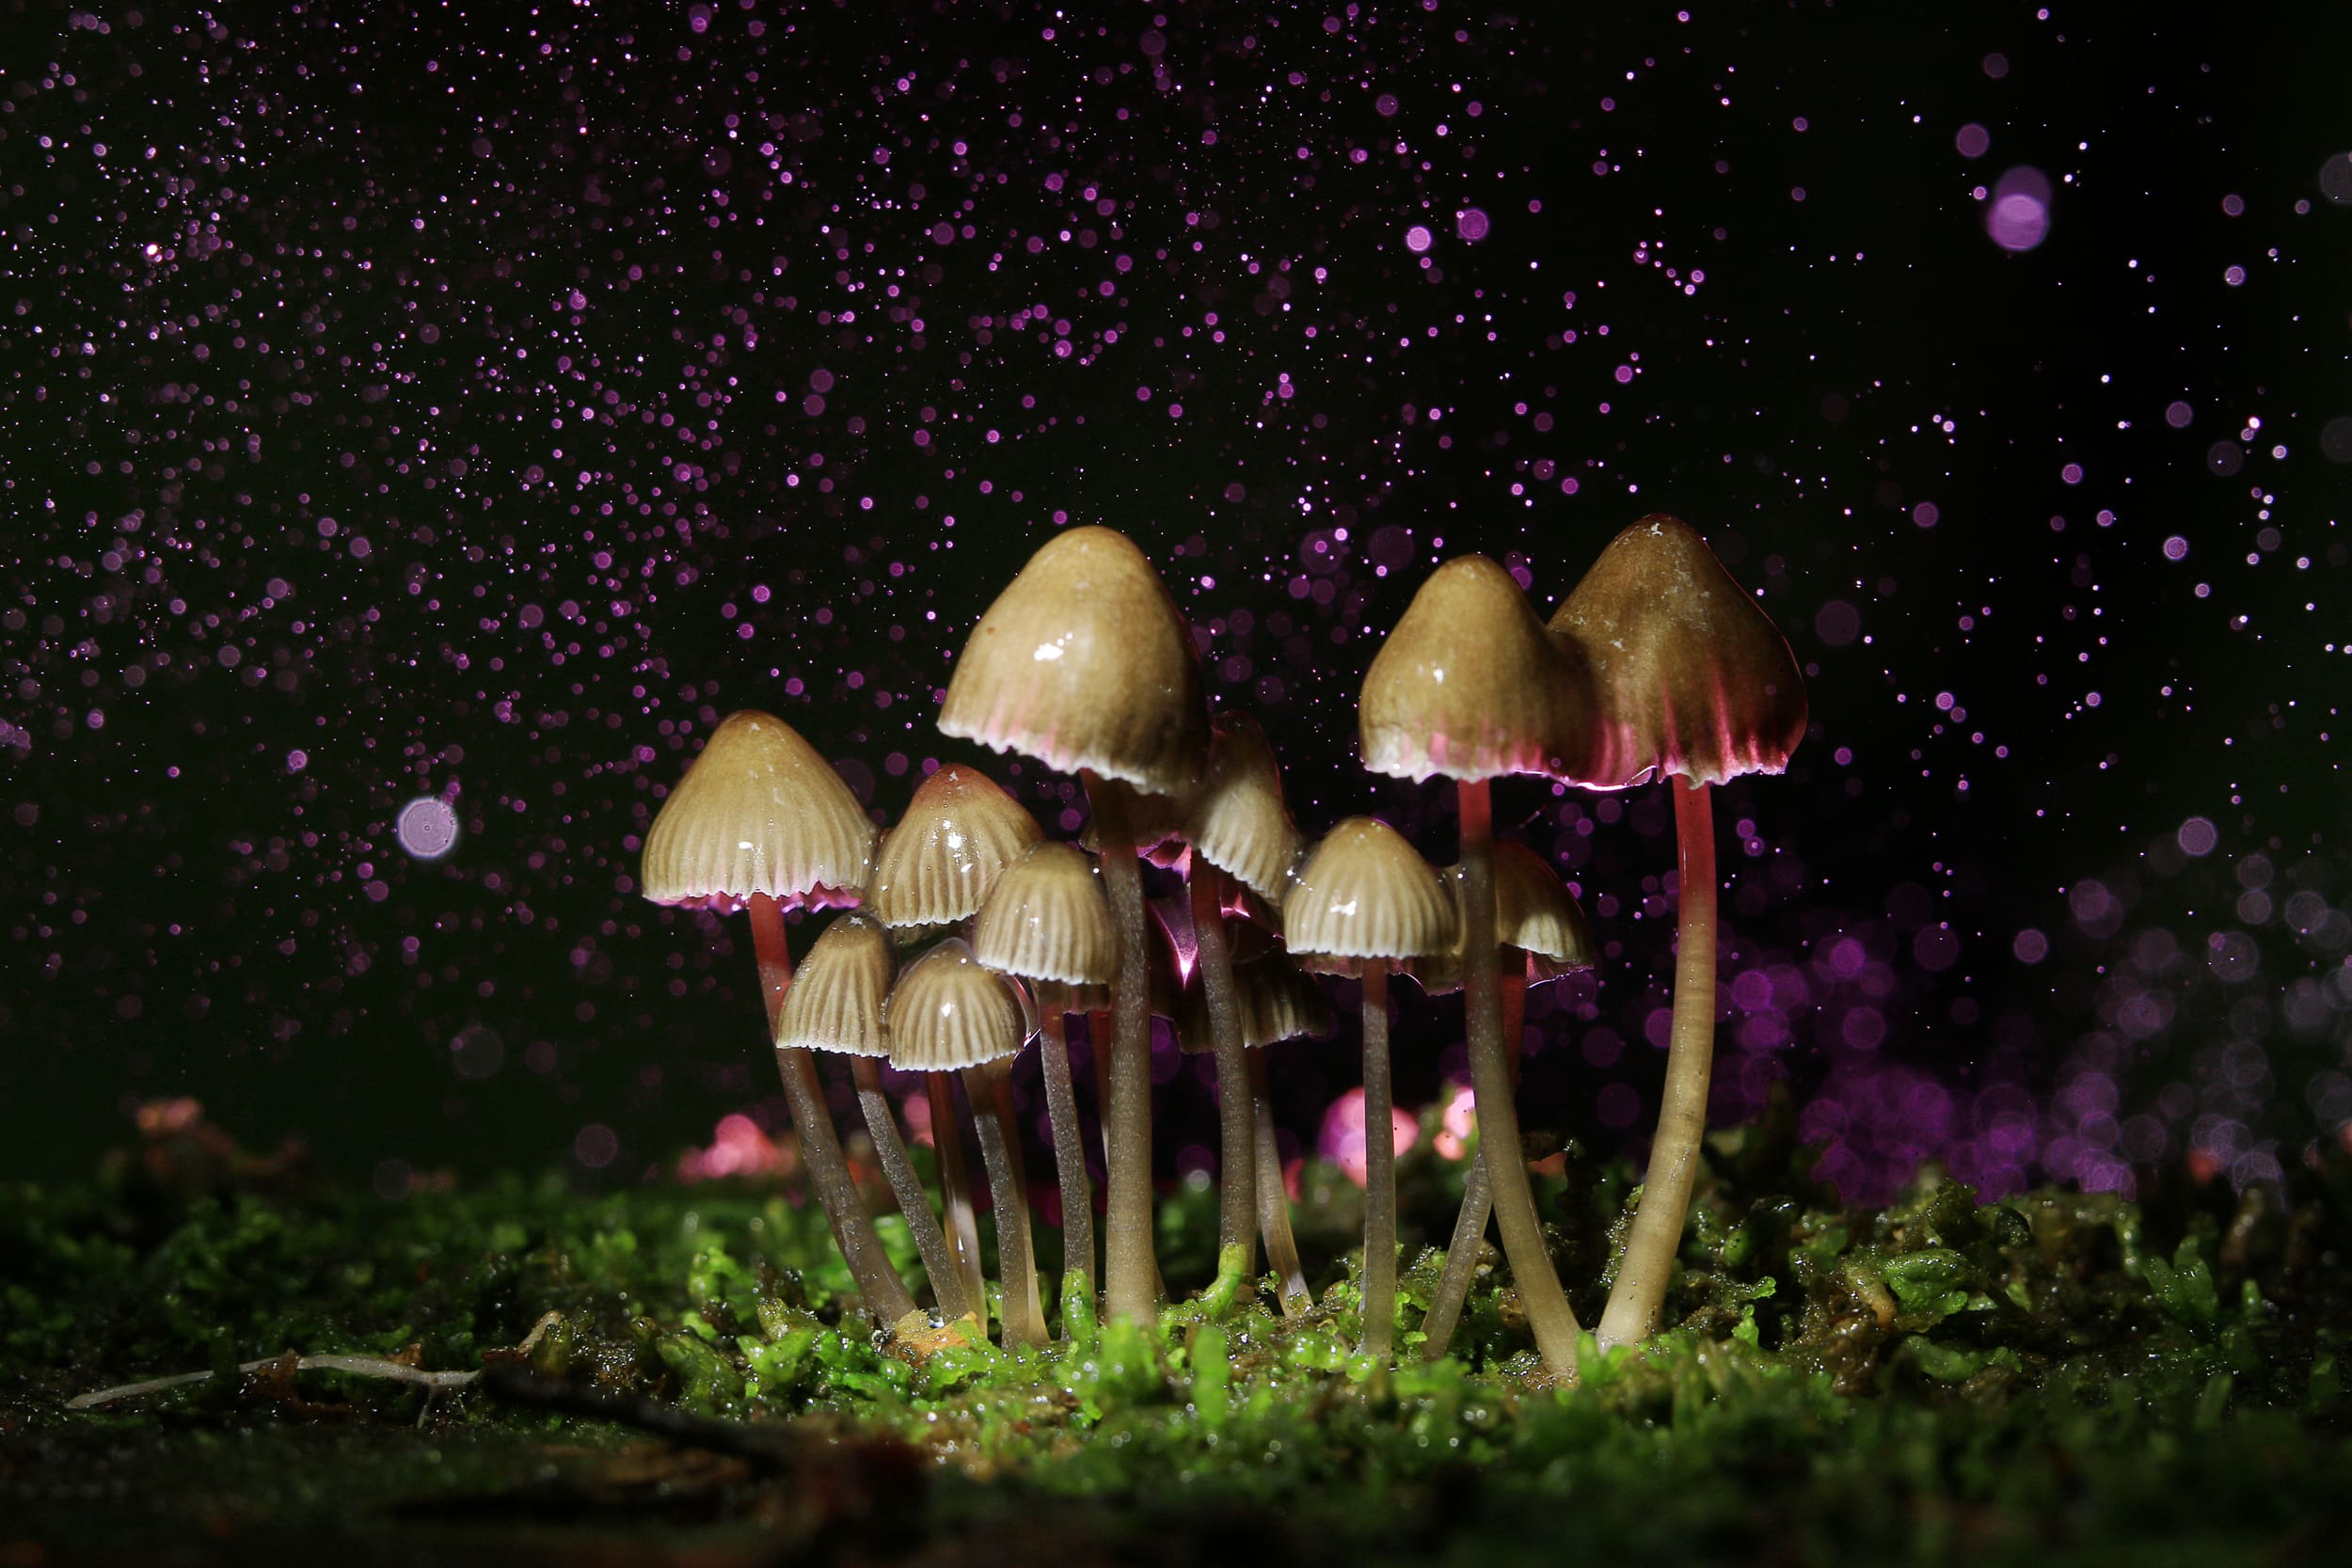 Bipartisan Senate Bill Would Give ‘Right to Try’ Protection to Psilocybin and MDMA